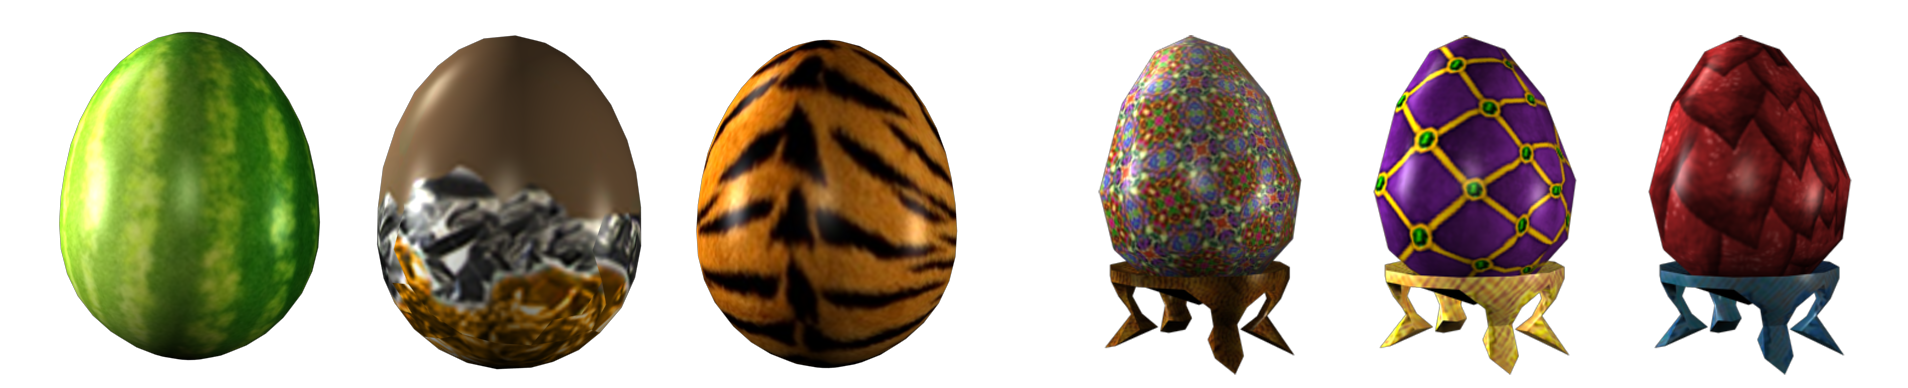 Presenting The Winners Of The Egg And Face Design Contests - roblox egg hunt contest